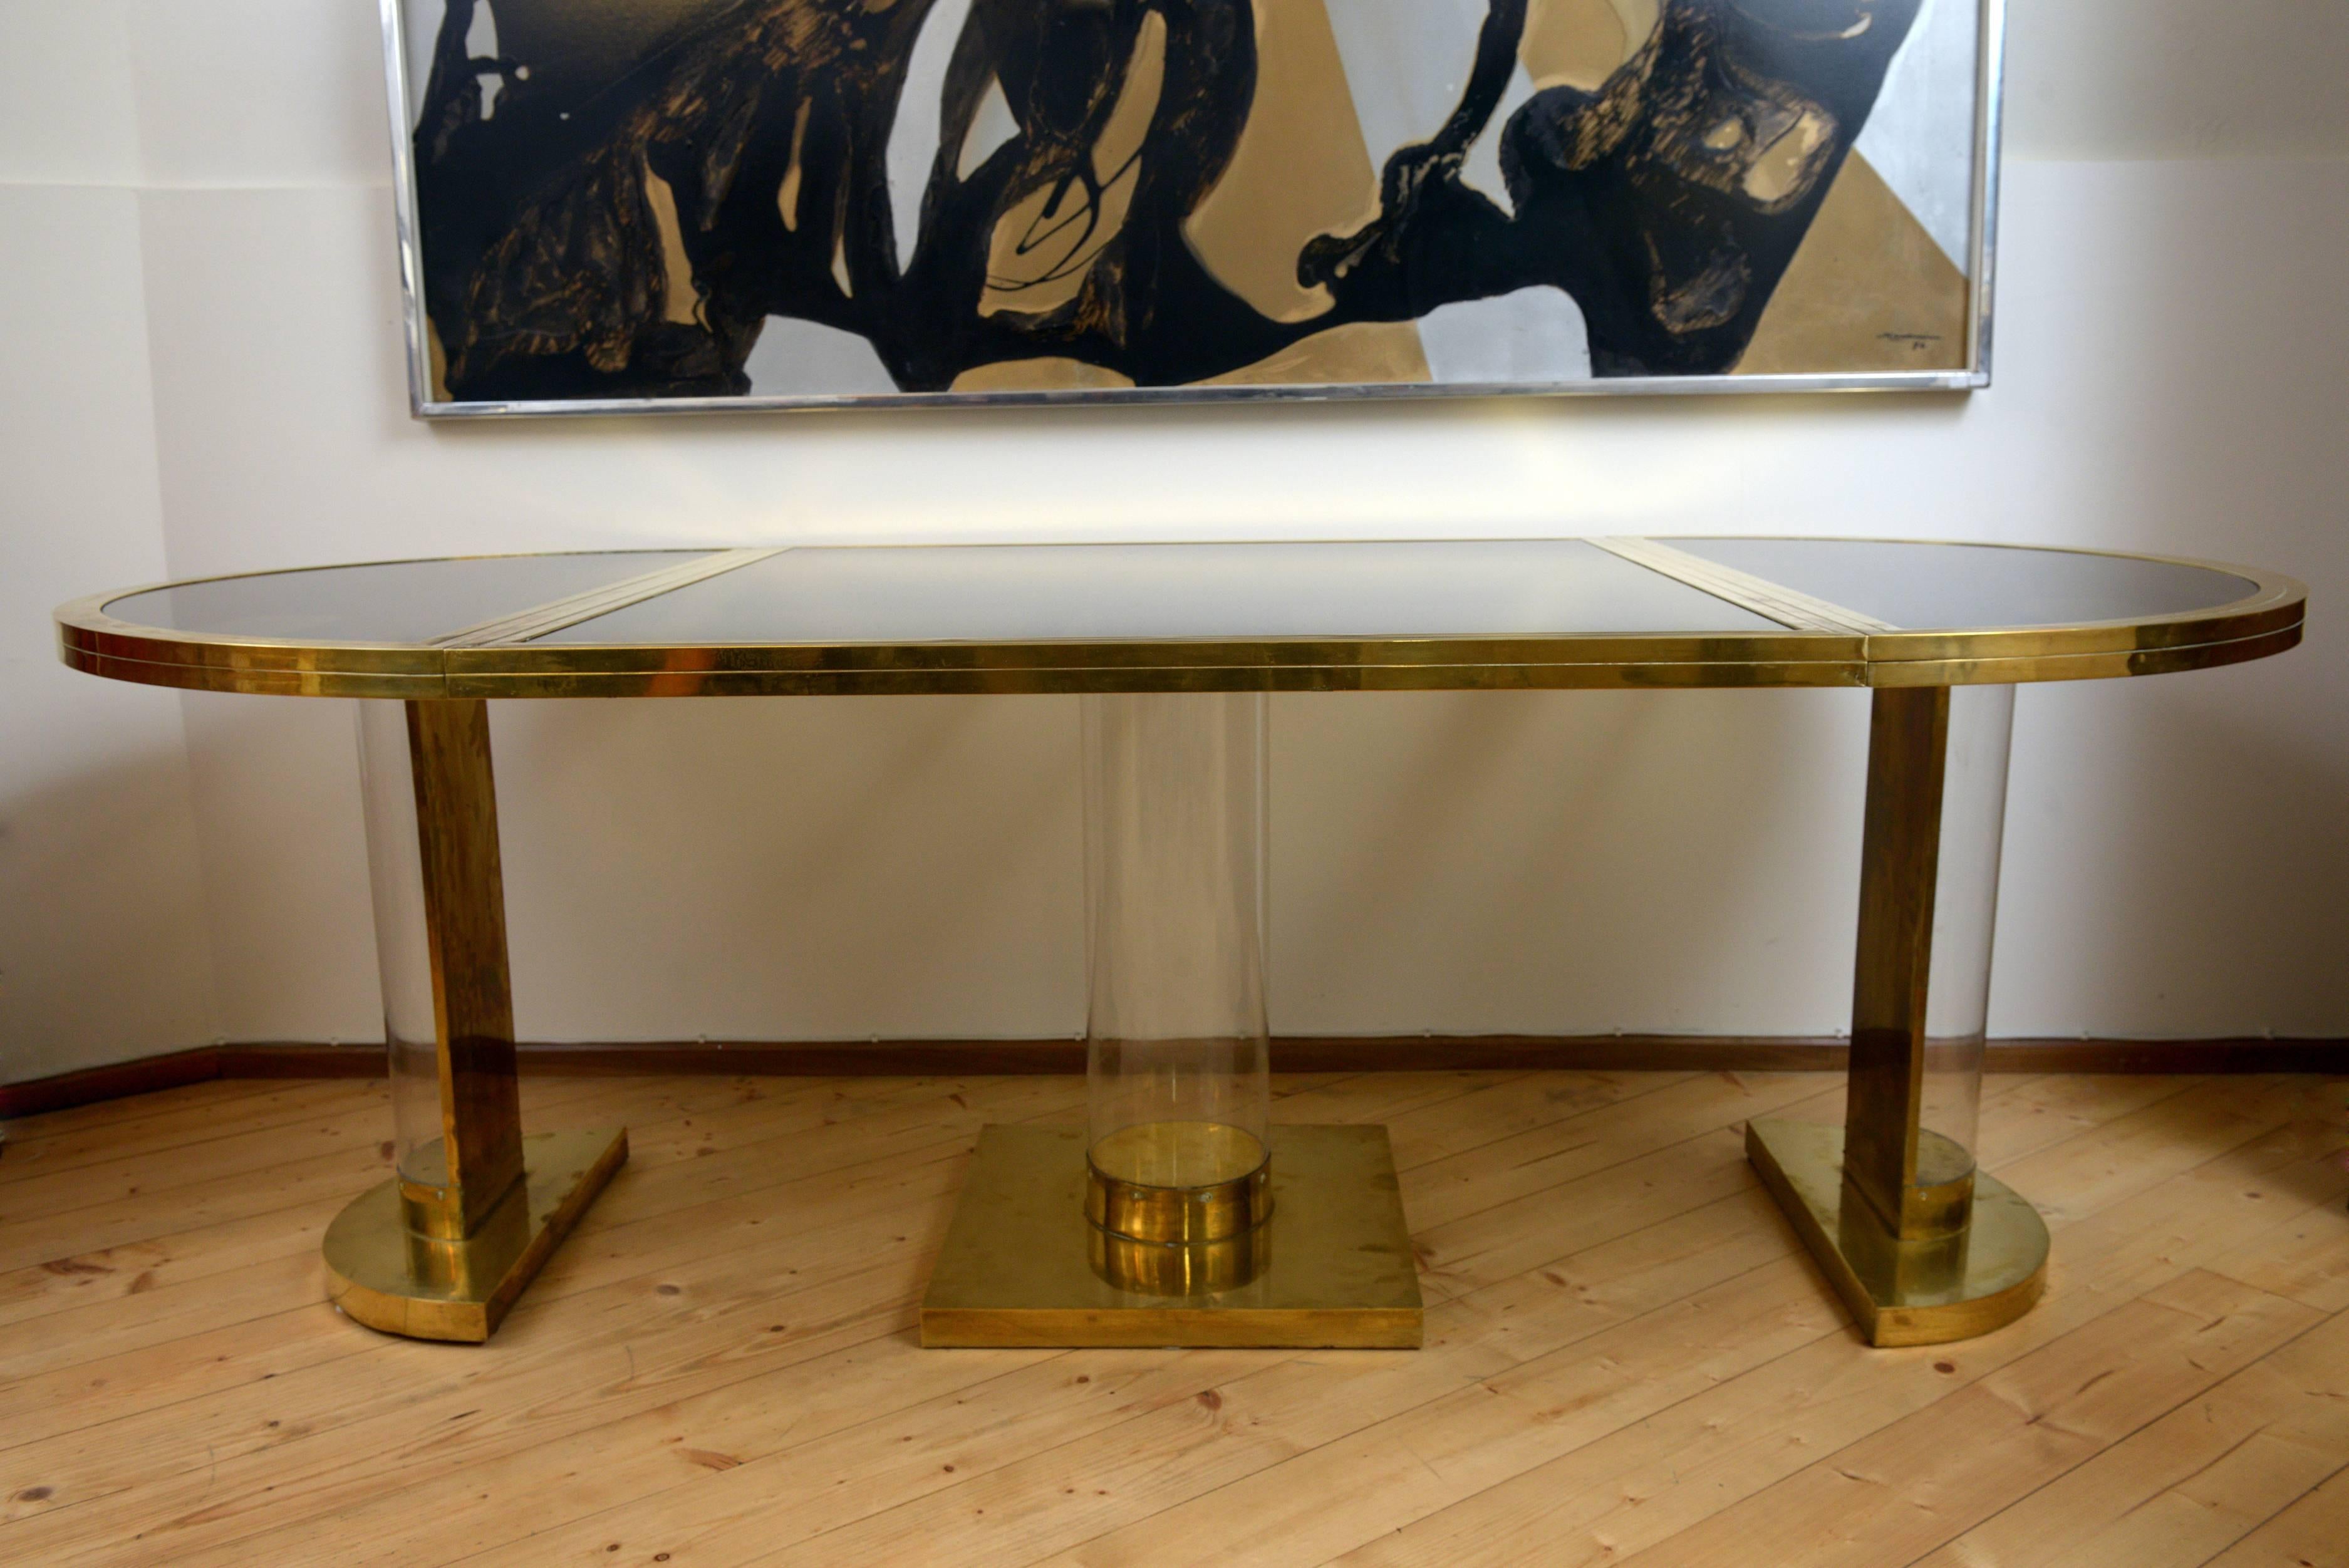 This dining table, brass smoked glass and plexiglass can be easily divided and becoming two demilune consoles (cm 110x 55) and a square table cm (110x110), or combining the two consoles in a round table (diameter cm 110 ) you can have two tables,